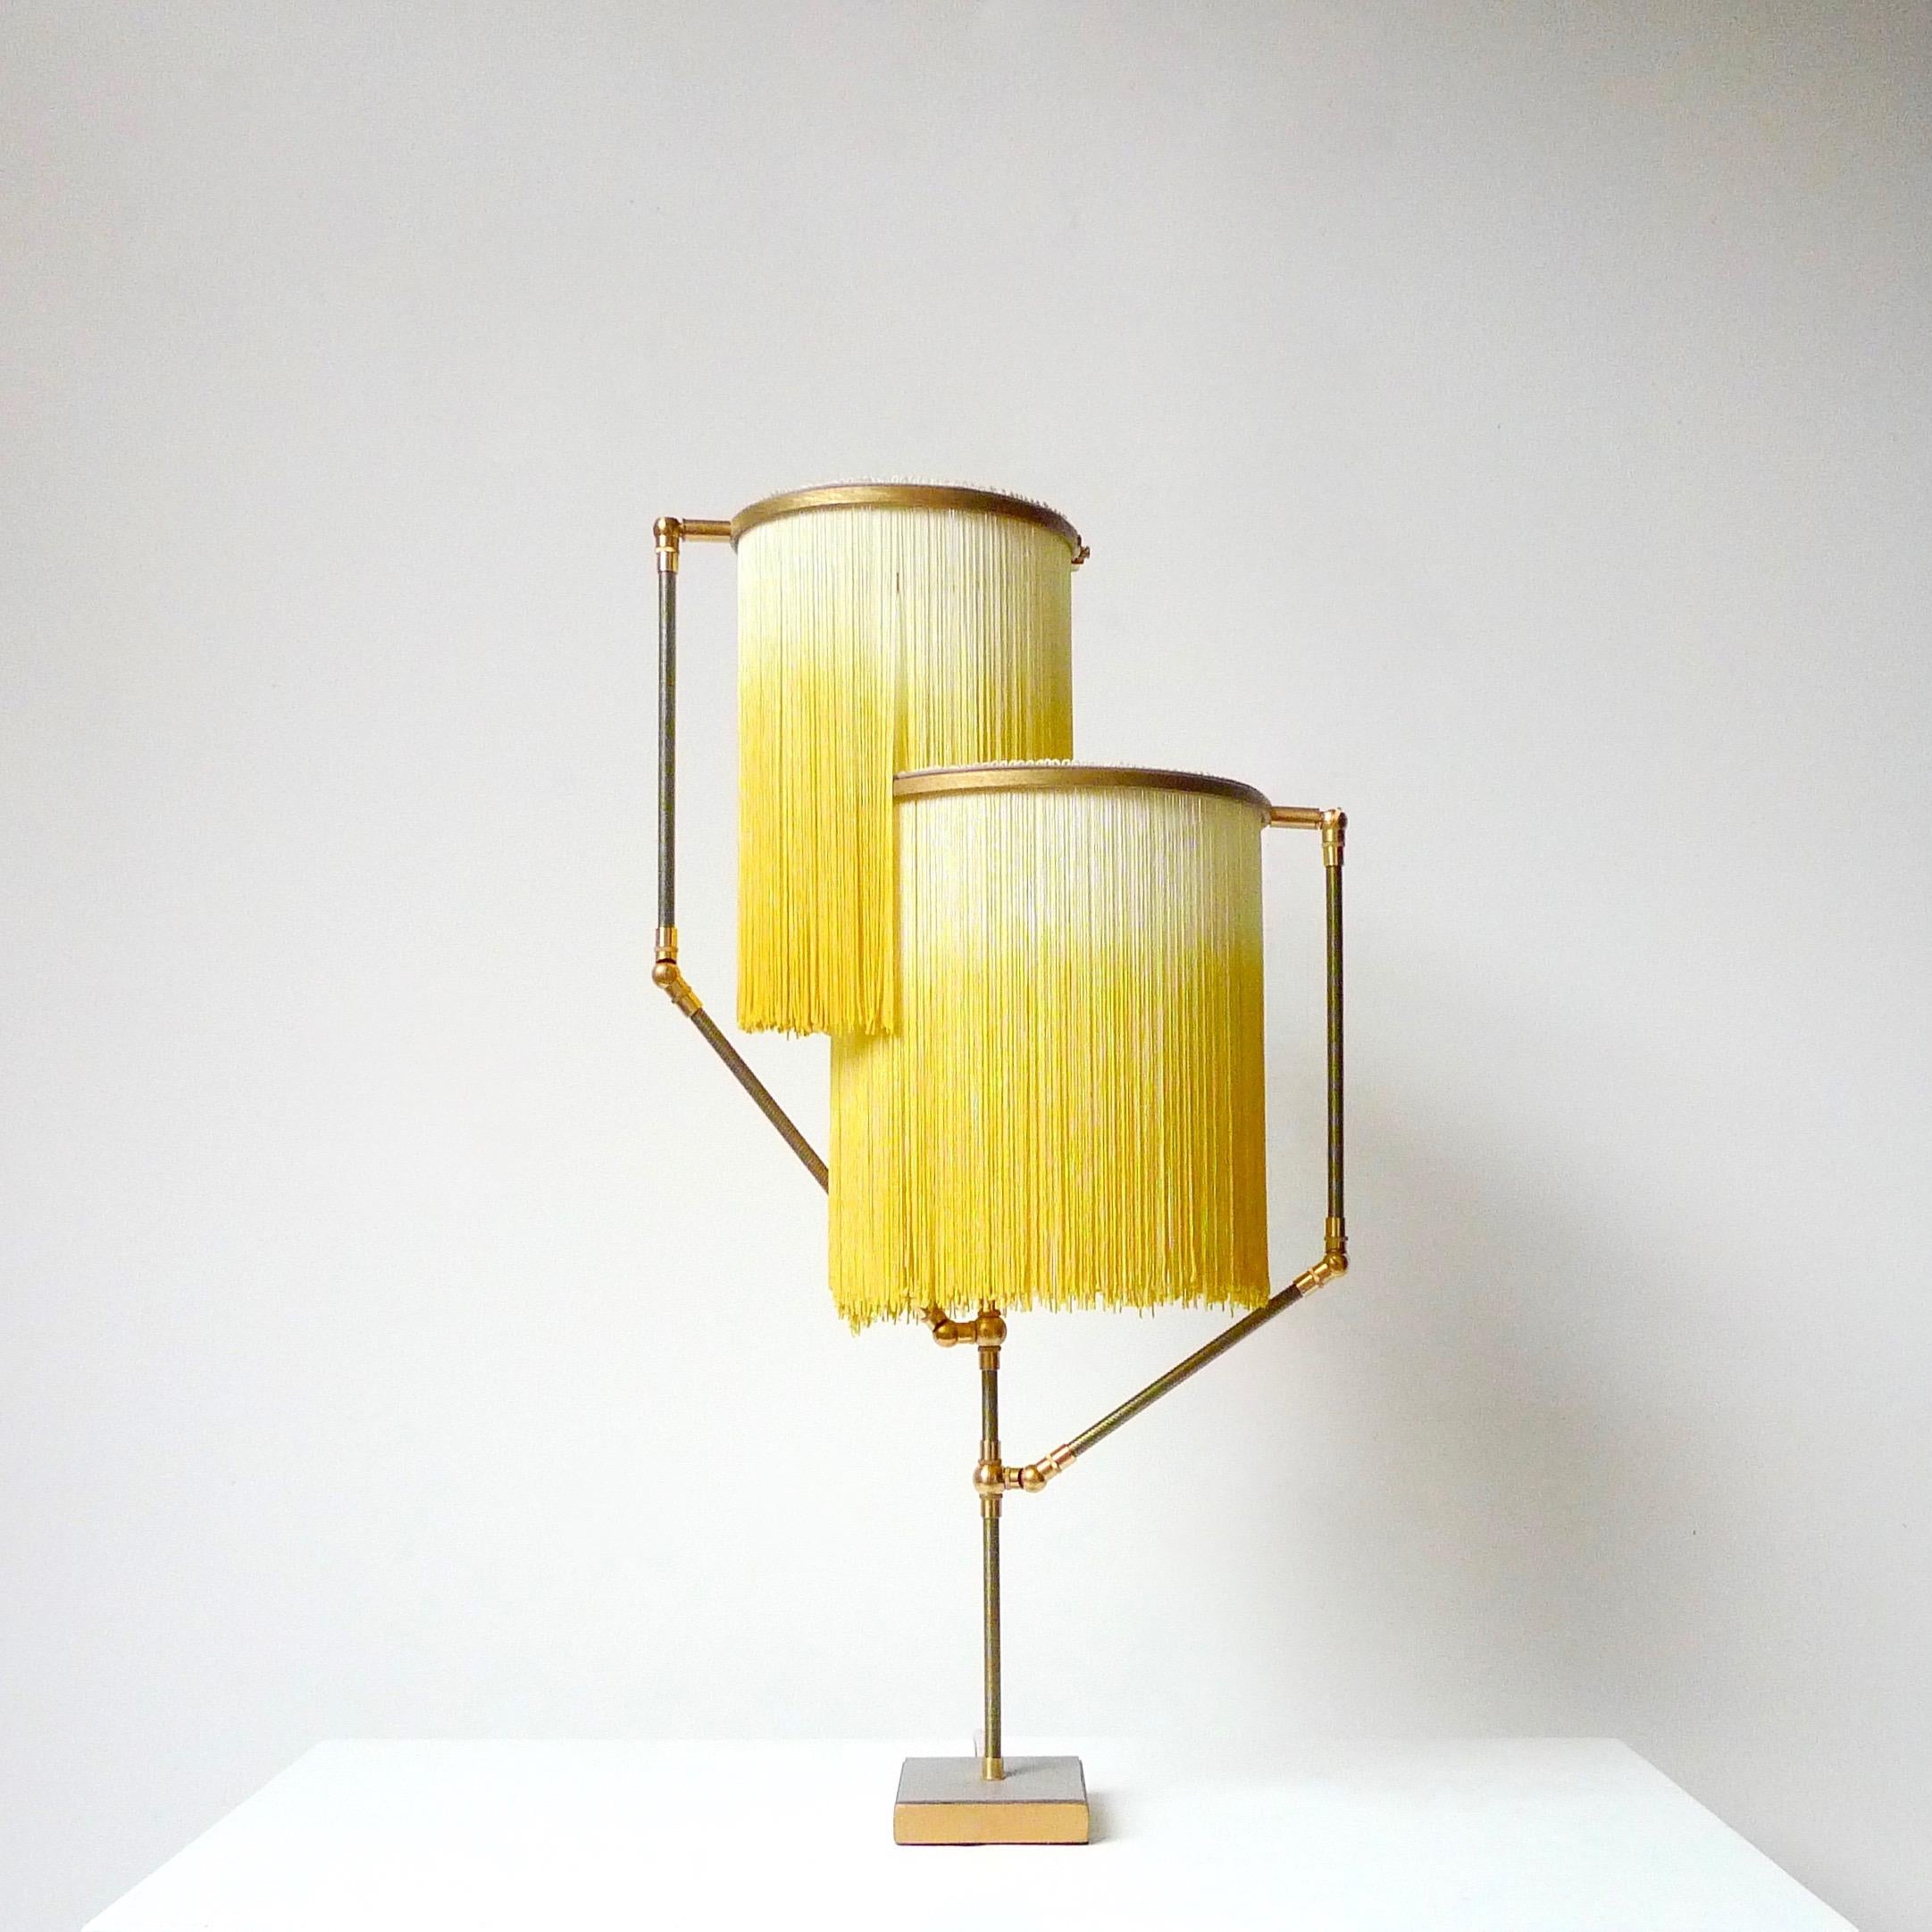 Yellow Charme table lamp, Sander Bottinga.

Dimensions: H 73 x W 38 x D 25 cm.

Handmade in brass, leather, wood and dip dyed colored Fringes in viscose.
The movable arms makes it possible to move the circles with fringes in different